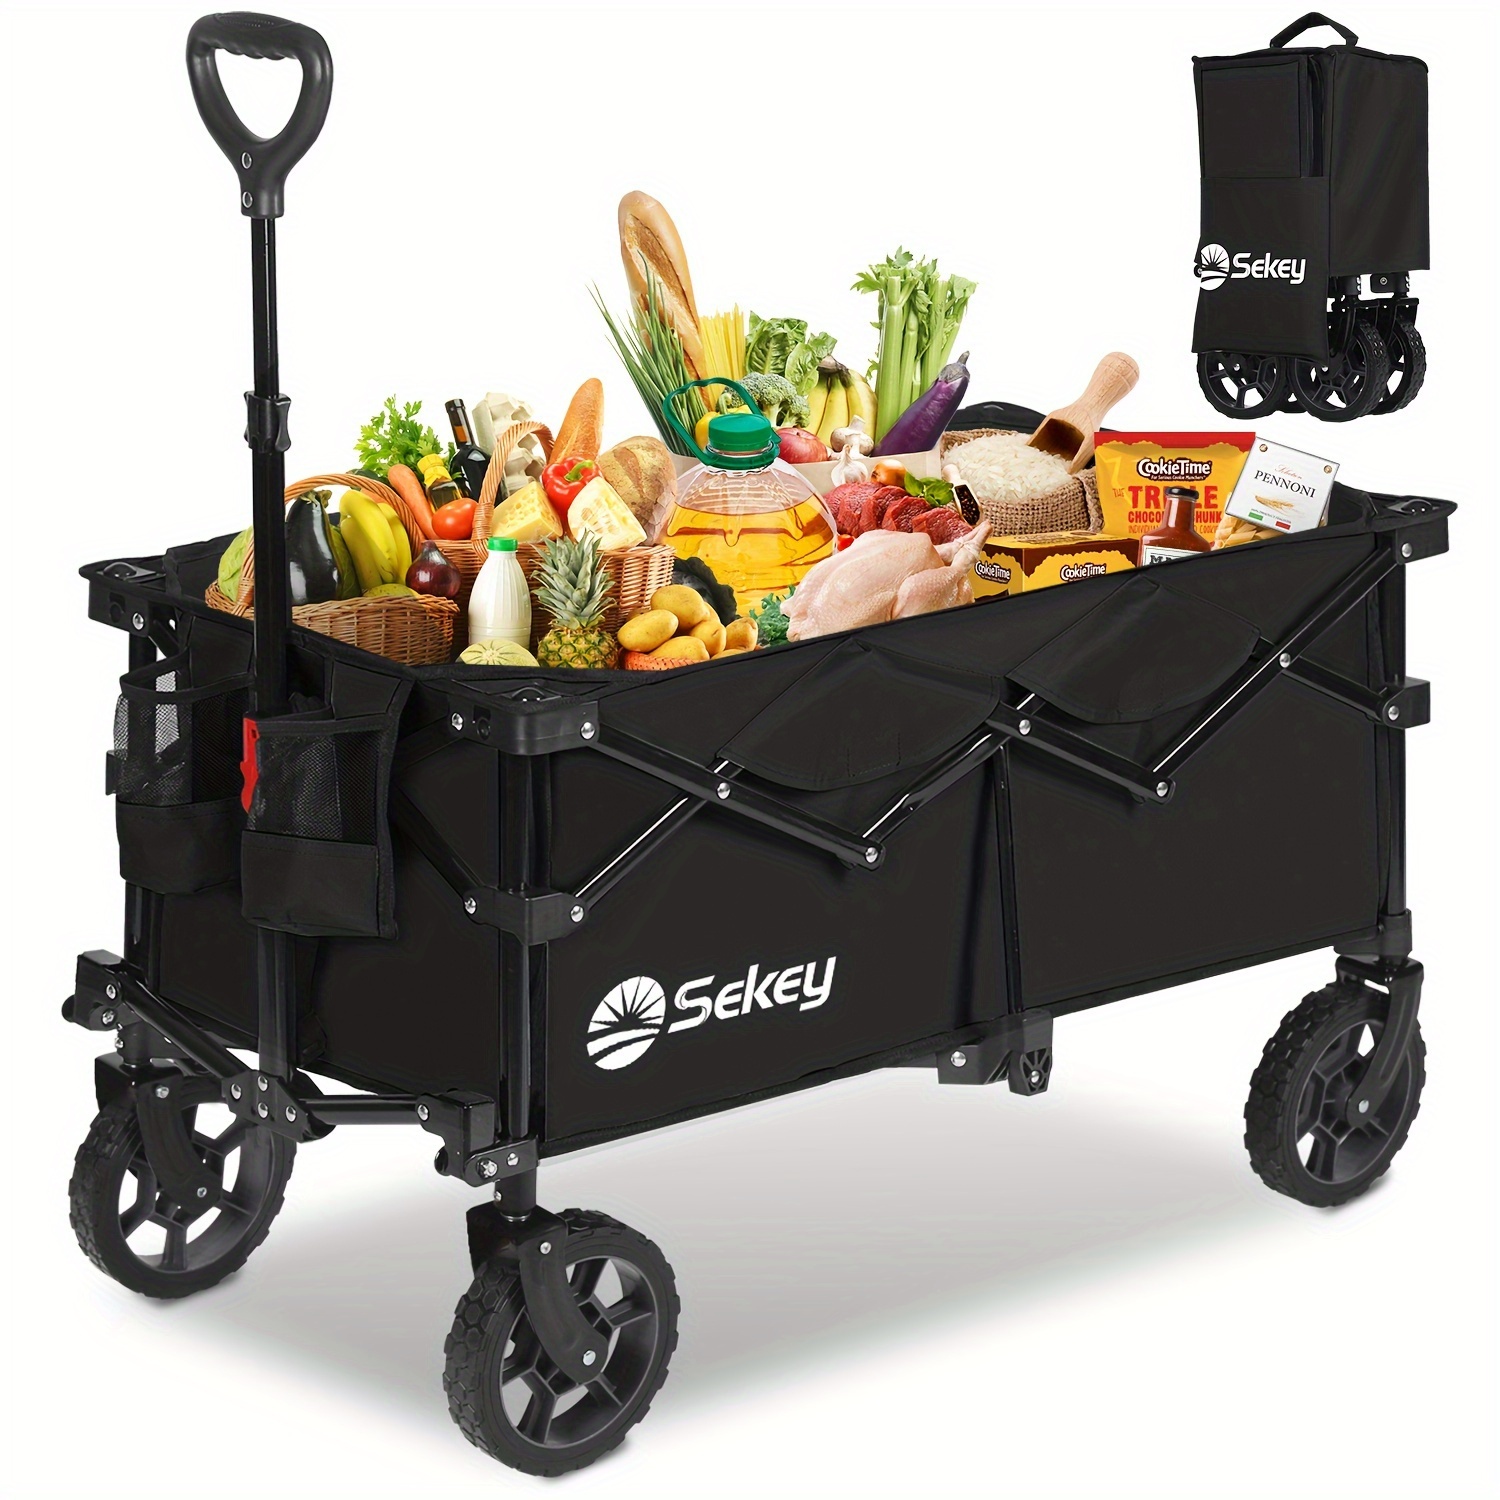 

Sekey Foldable Wagon Heavy Duty Foldable Utility Grocery Cart With 2 Bottle Holder, Suitable For Camping Shopping Sports